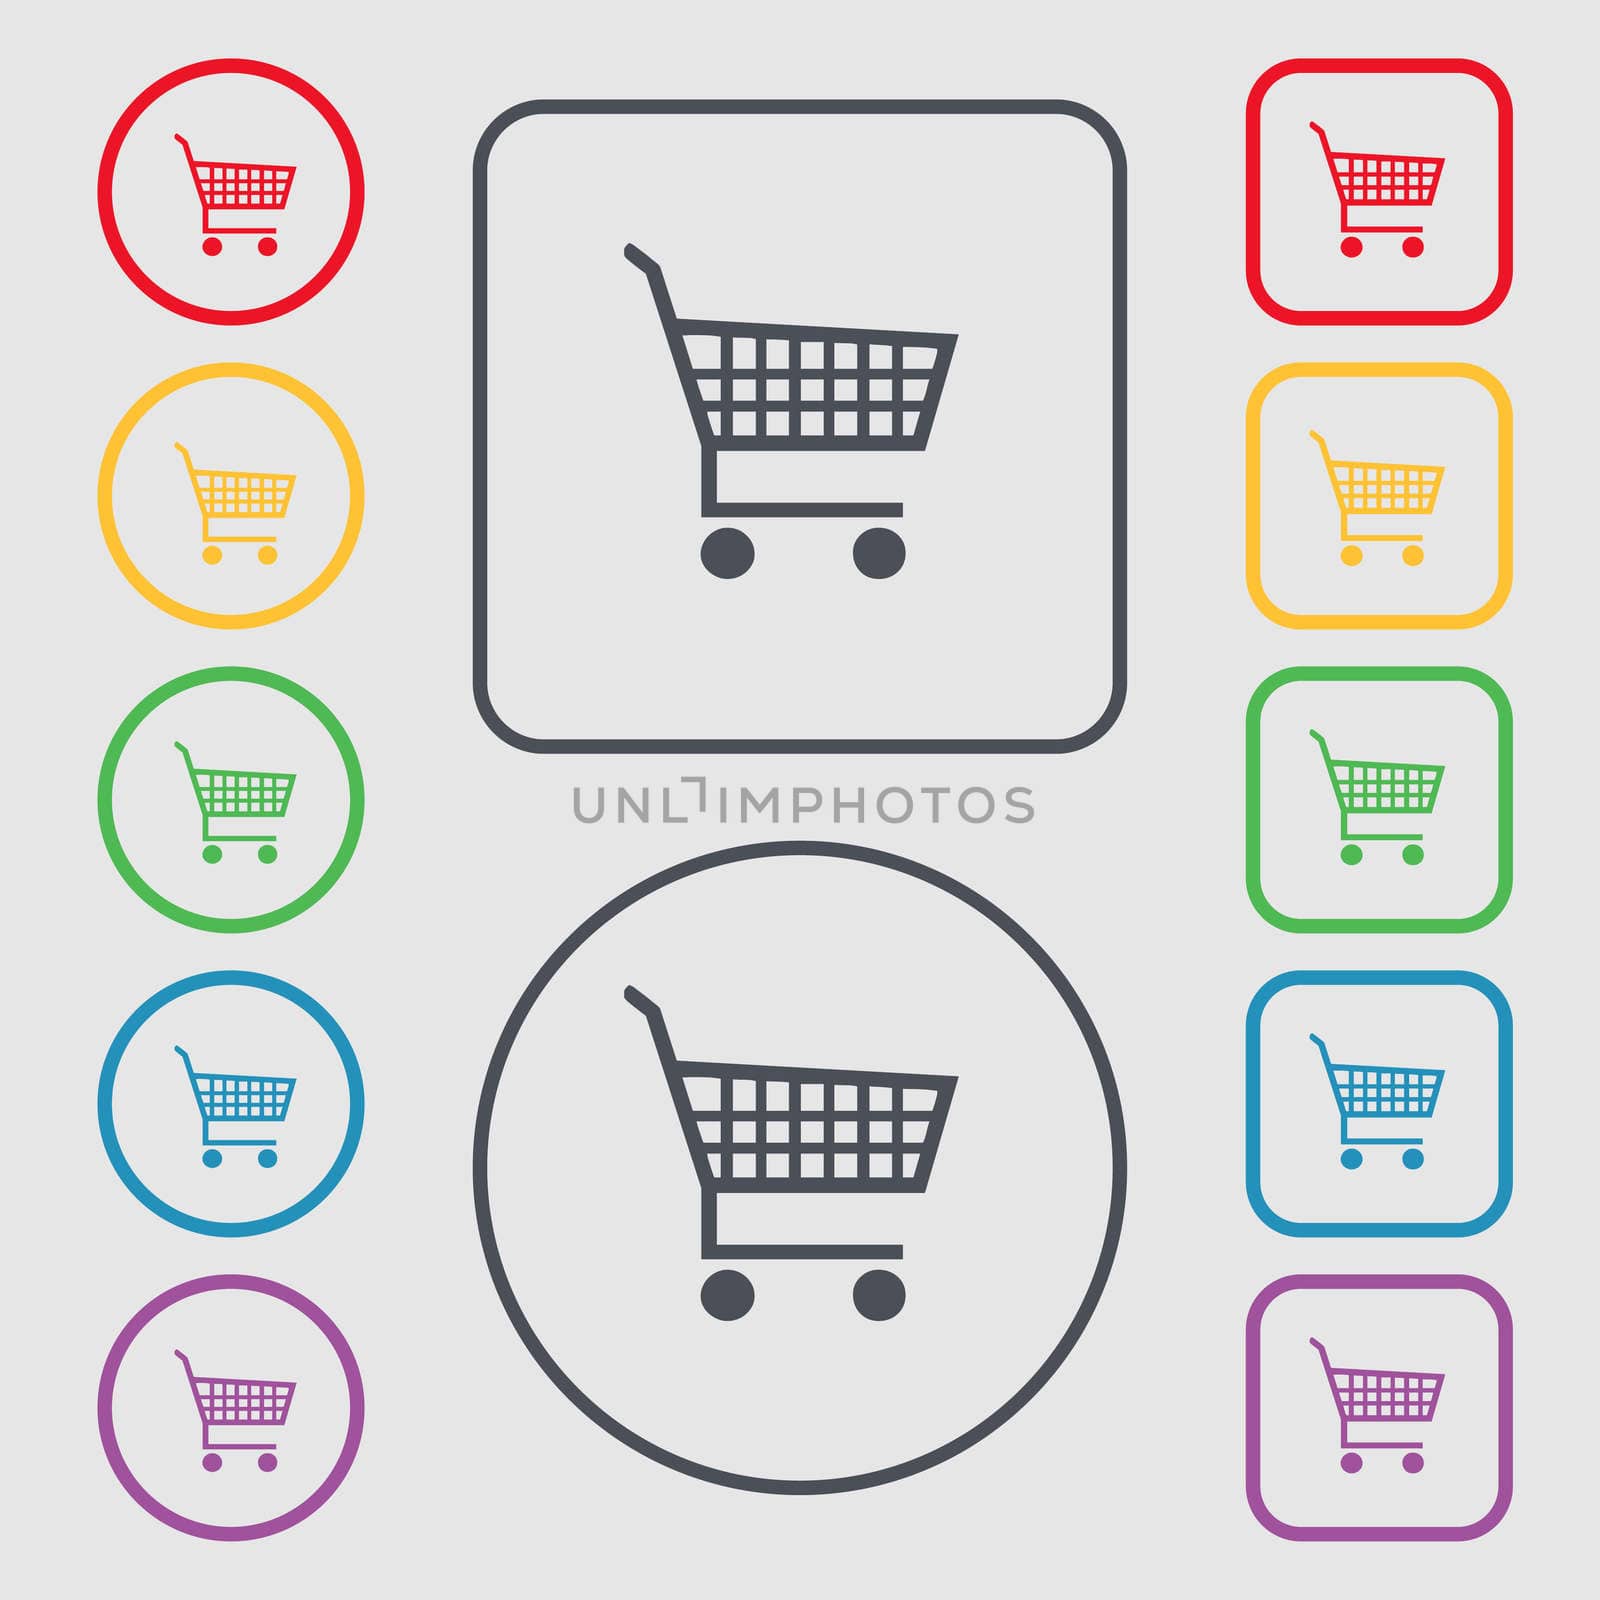 shopping cart icon sign. symbol on the Round and square buttons with frame. illustration